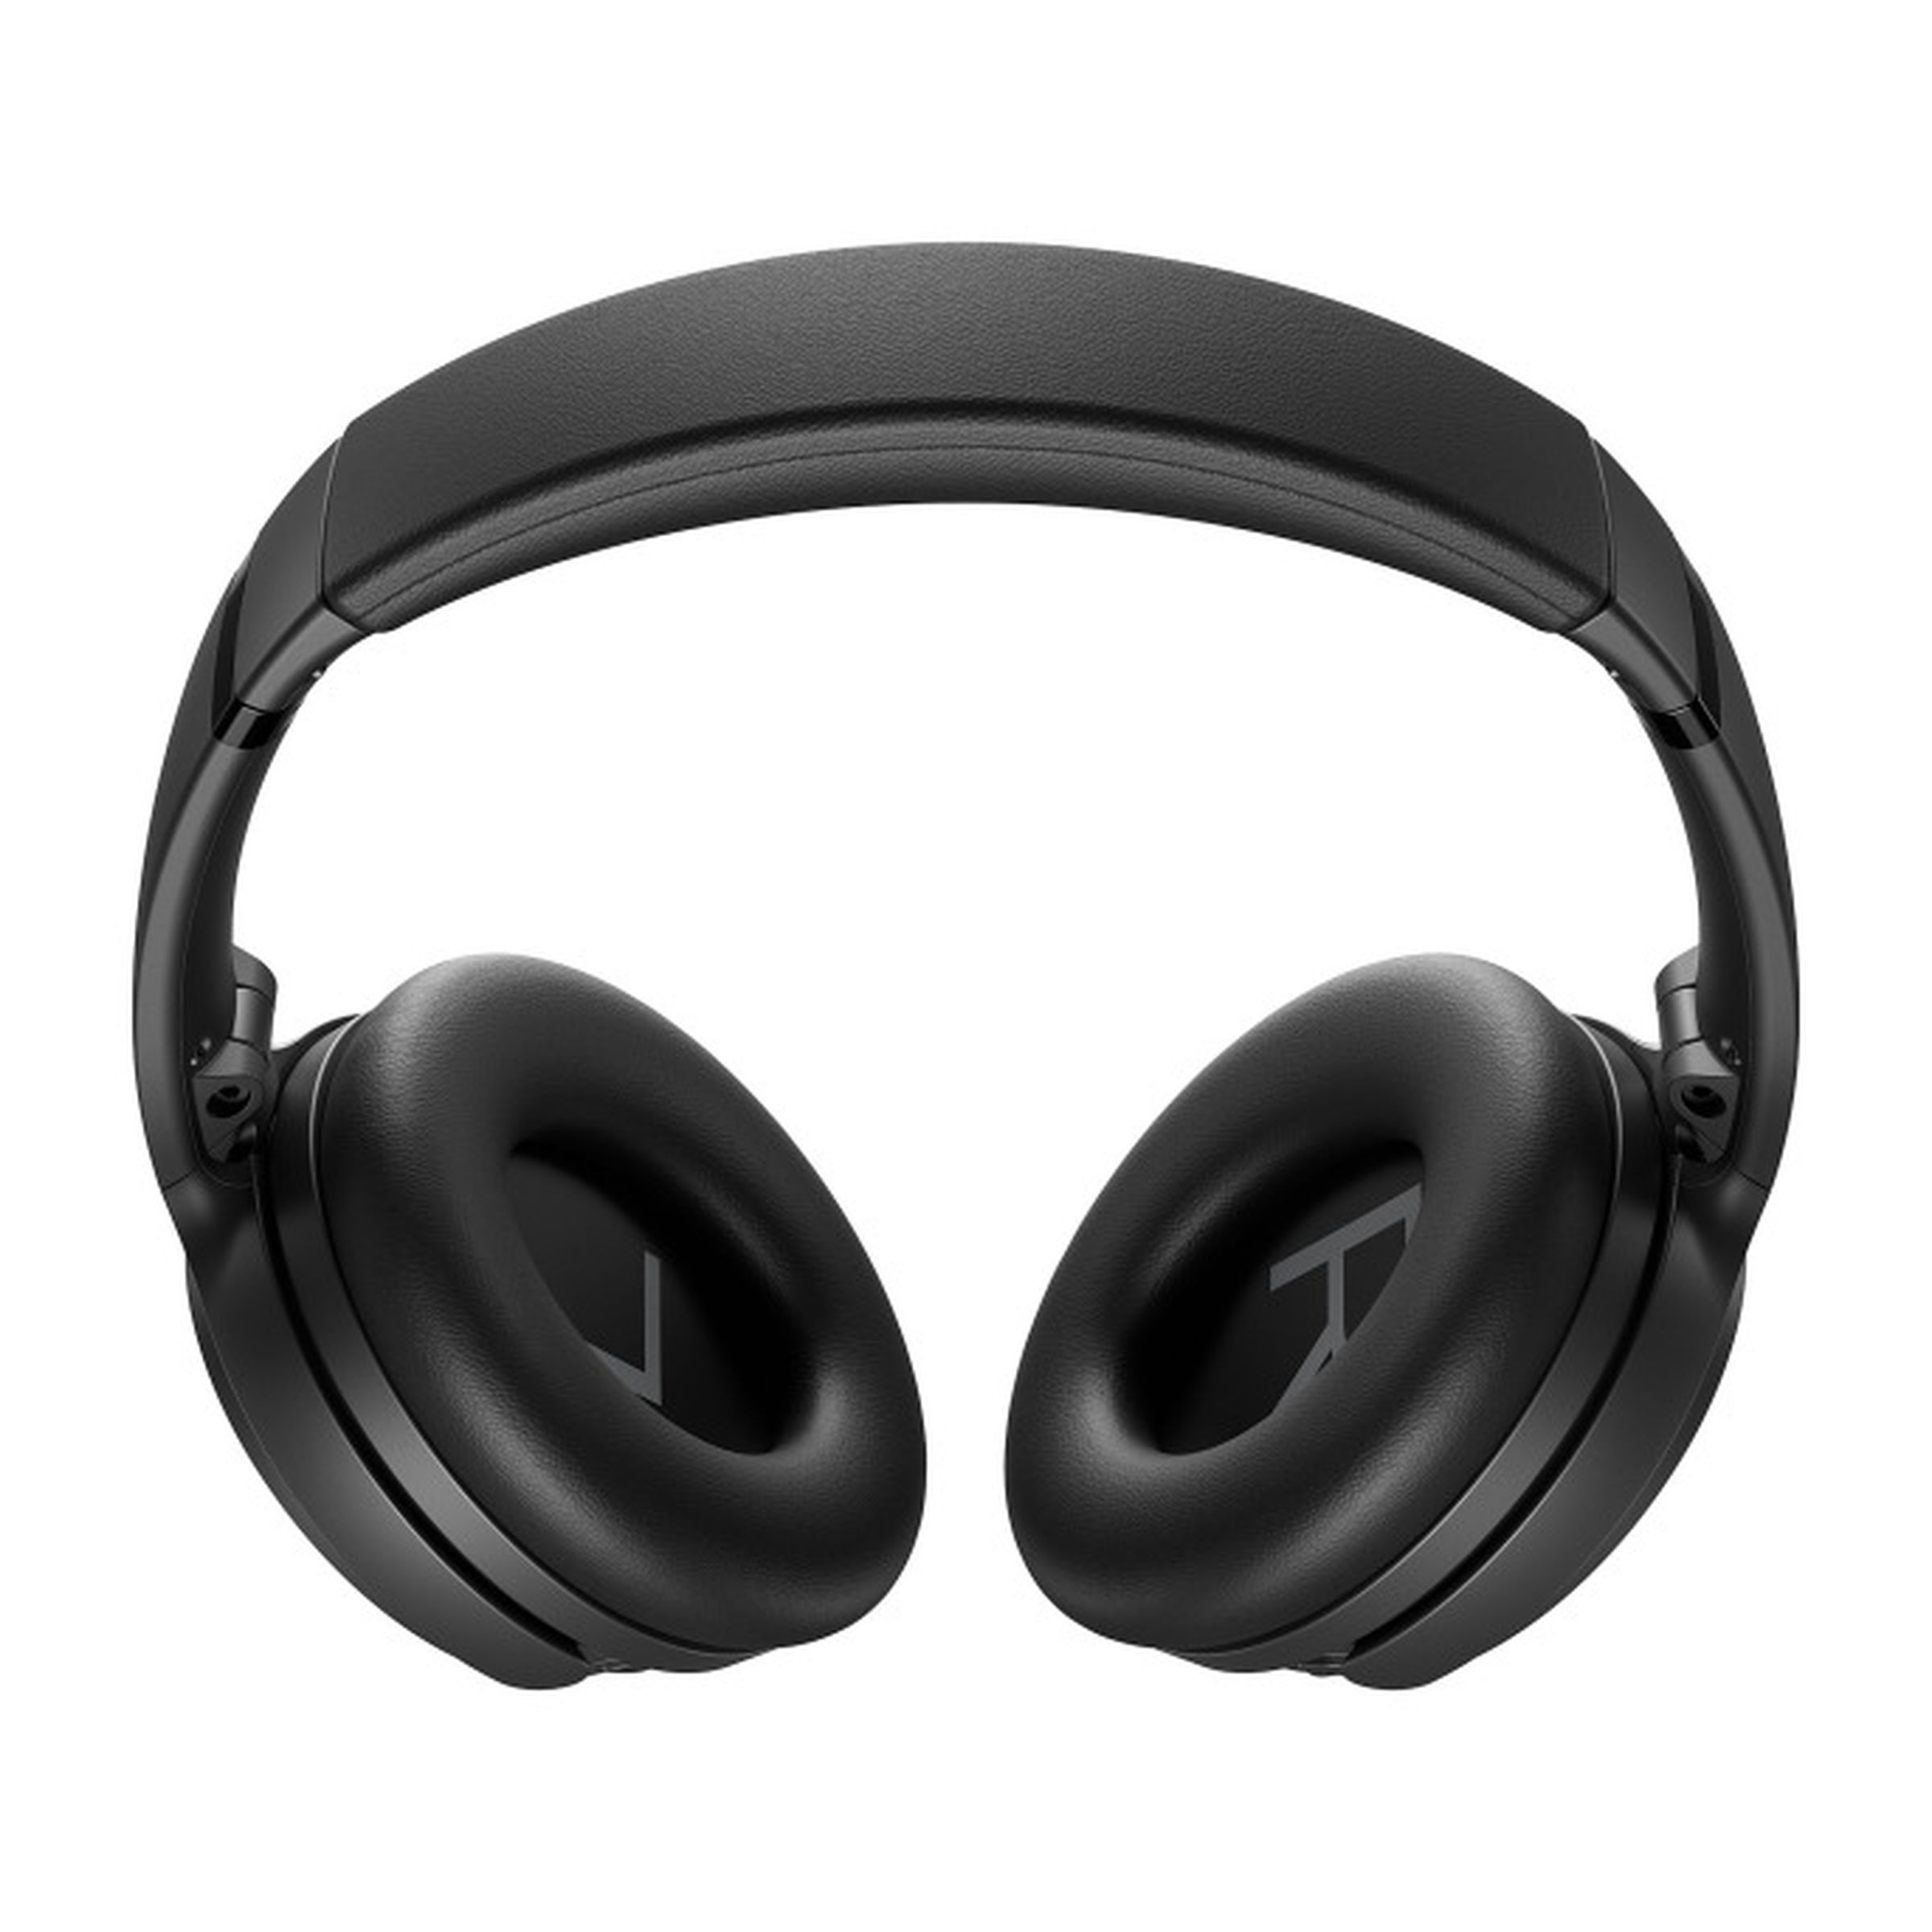 The QC45s looks very similar to the prior QC35II headphones.